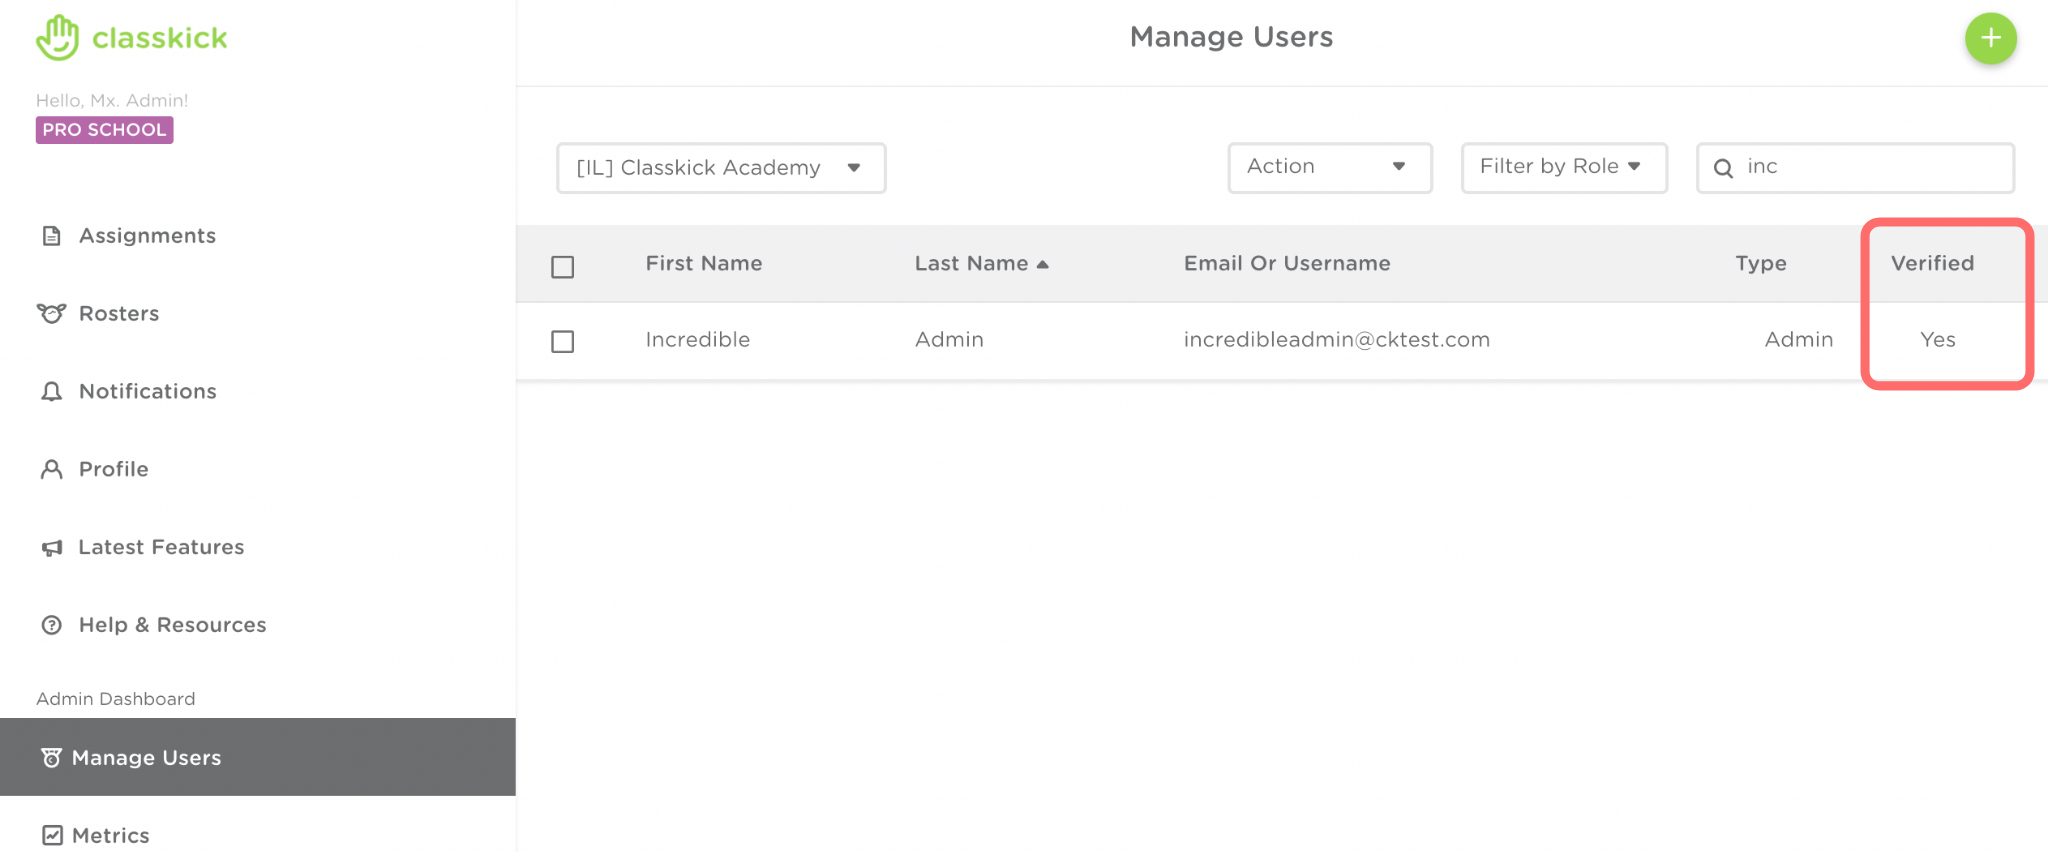 The Admin dashboard is shown. An admin is shown and the verified column is highlighted.